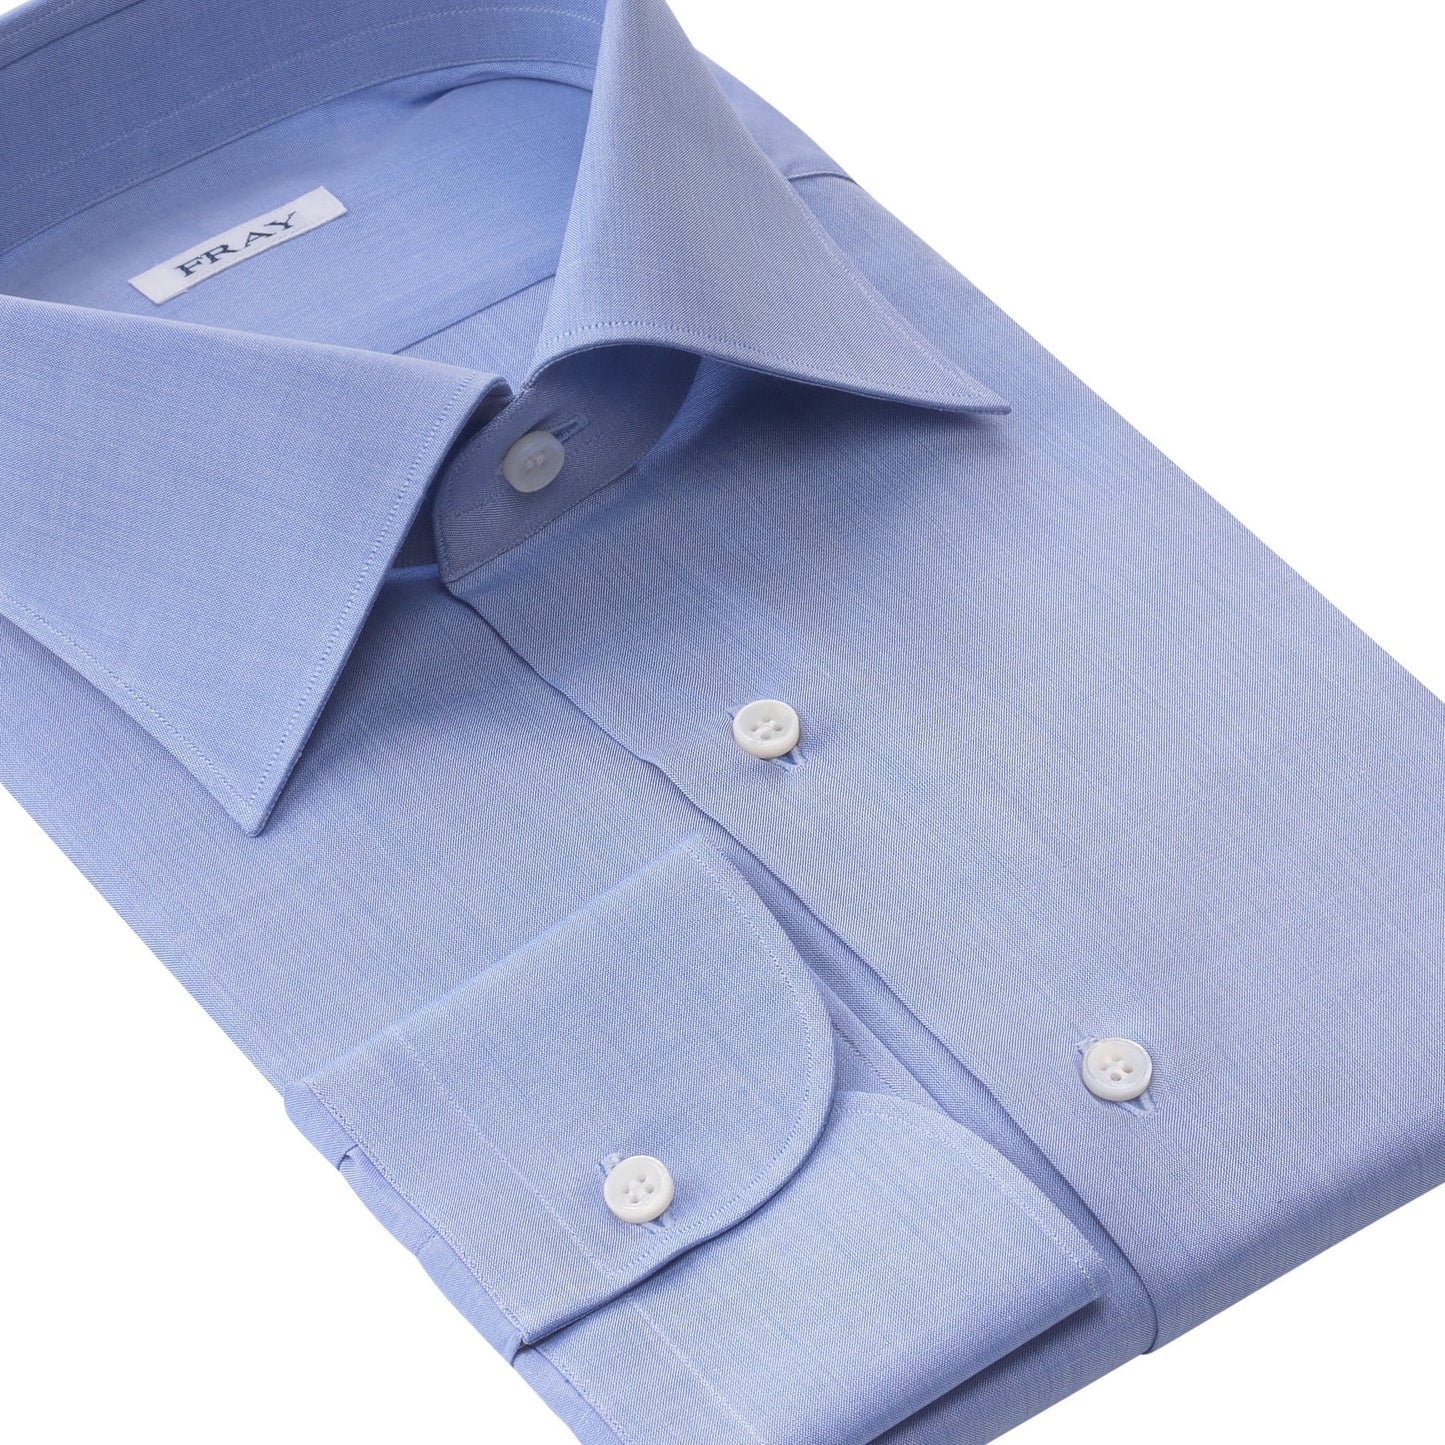 Fray Cotton Blue Shirt with Classic Collar - SARTALE